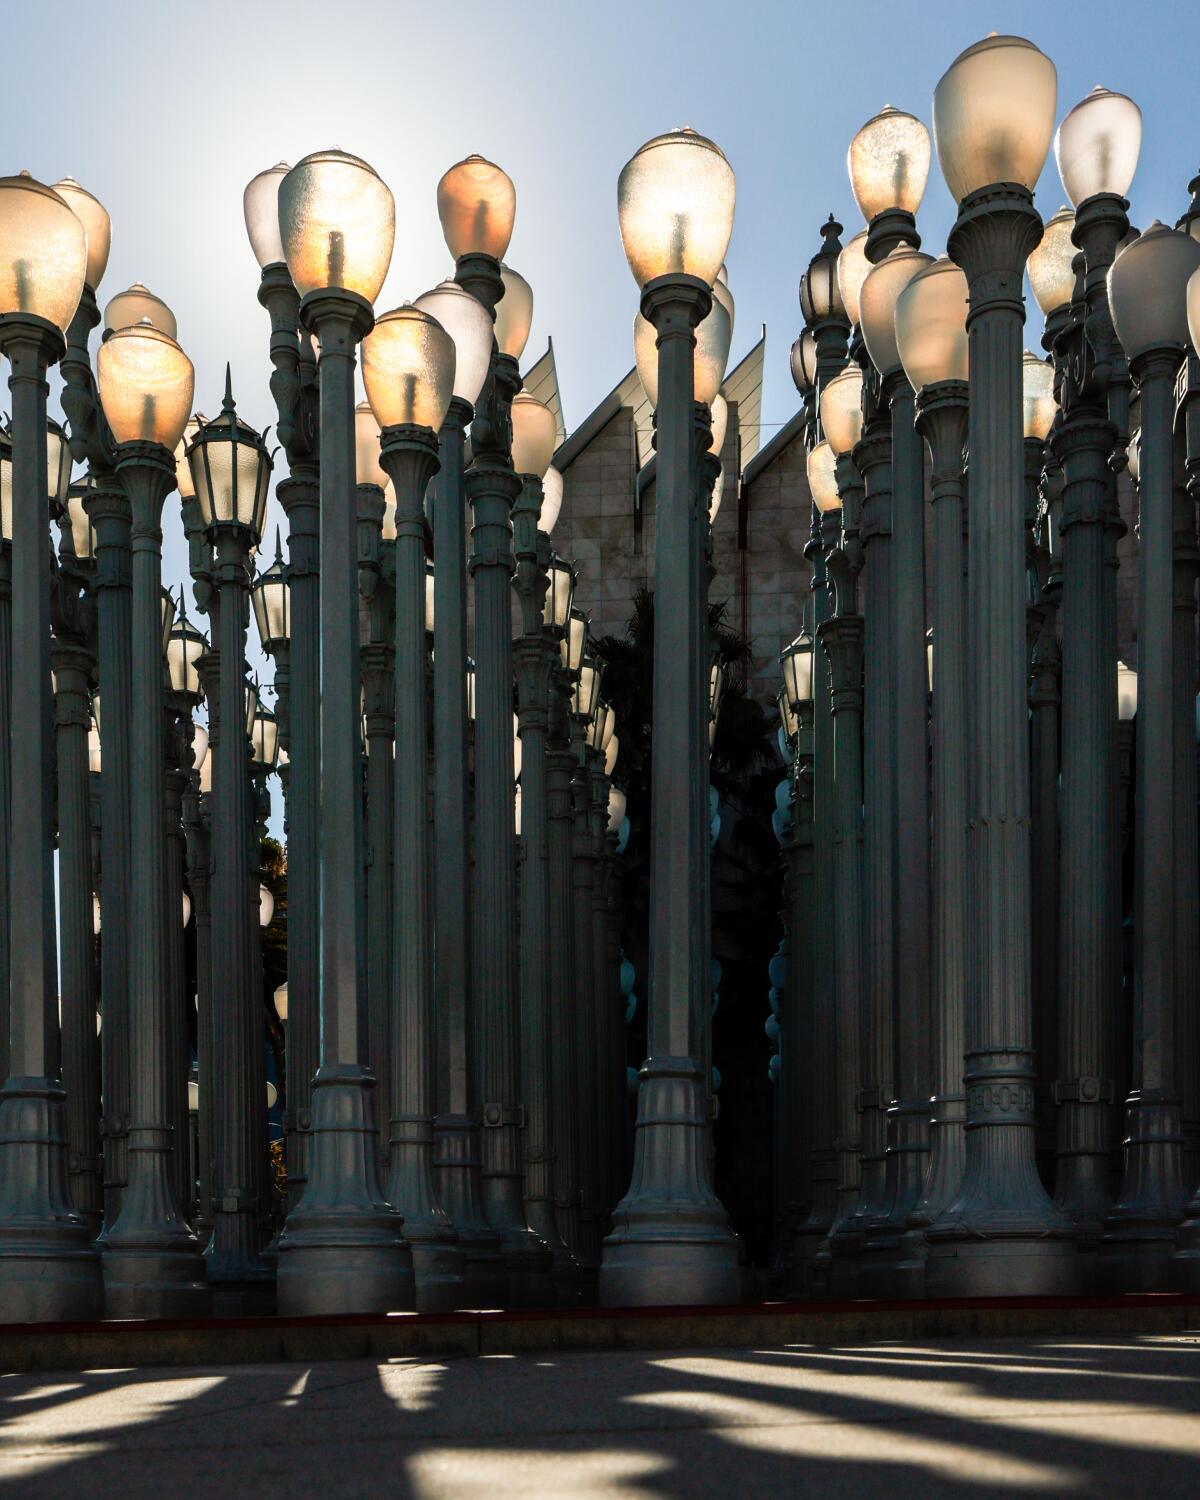 A collection of street lamps is a work of art at the Los Angeles County Museum of Art.